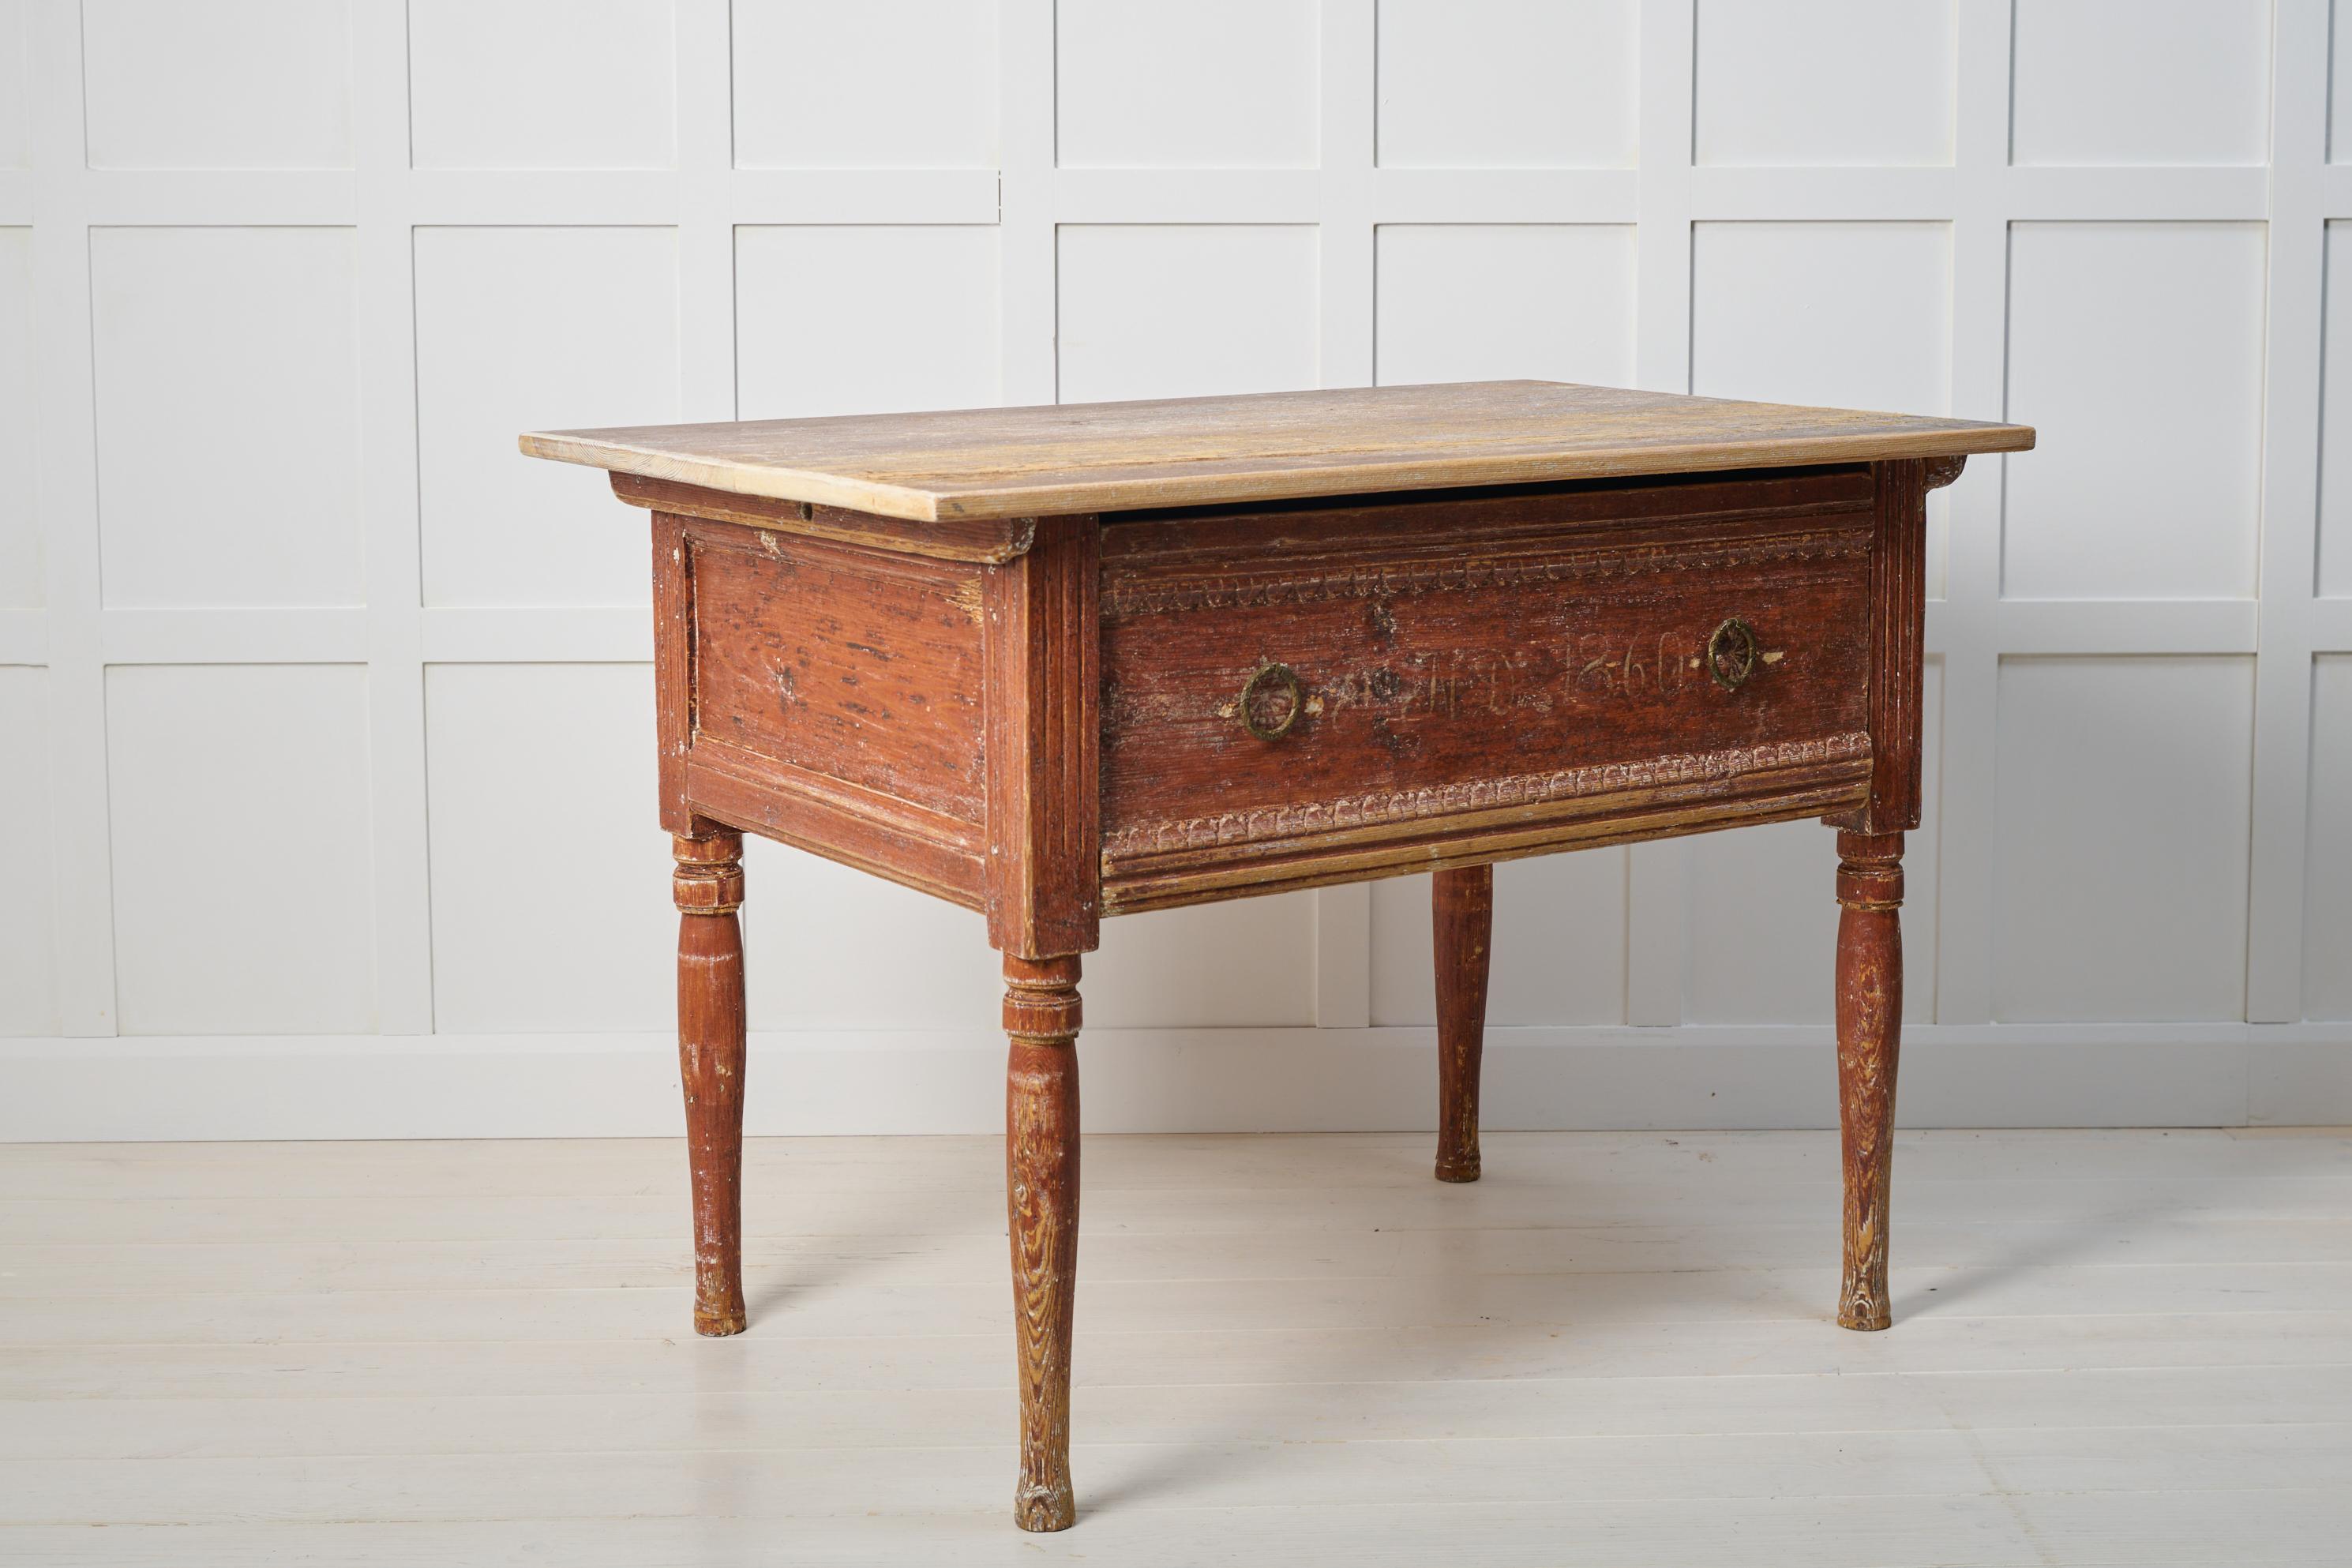 Genuine Antique Swedish Rustic Low Country Table with Drawer In Good Condition For Sale In Kramfors, SE